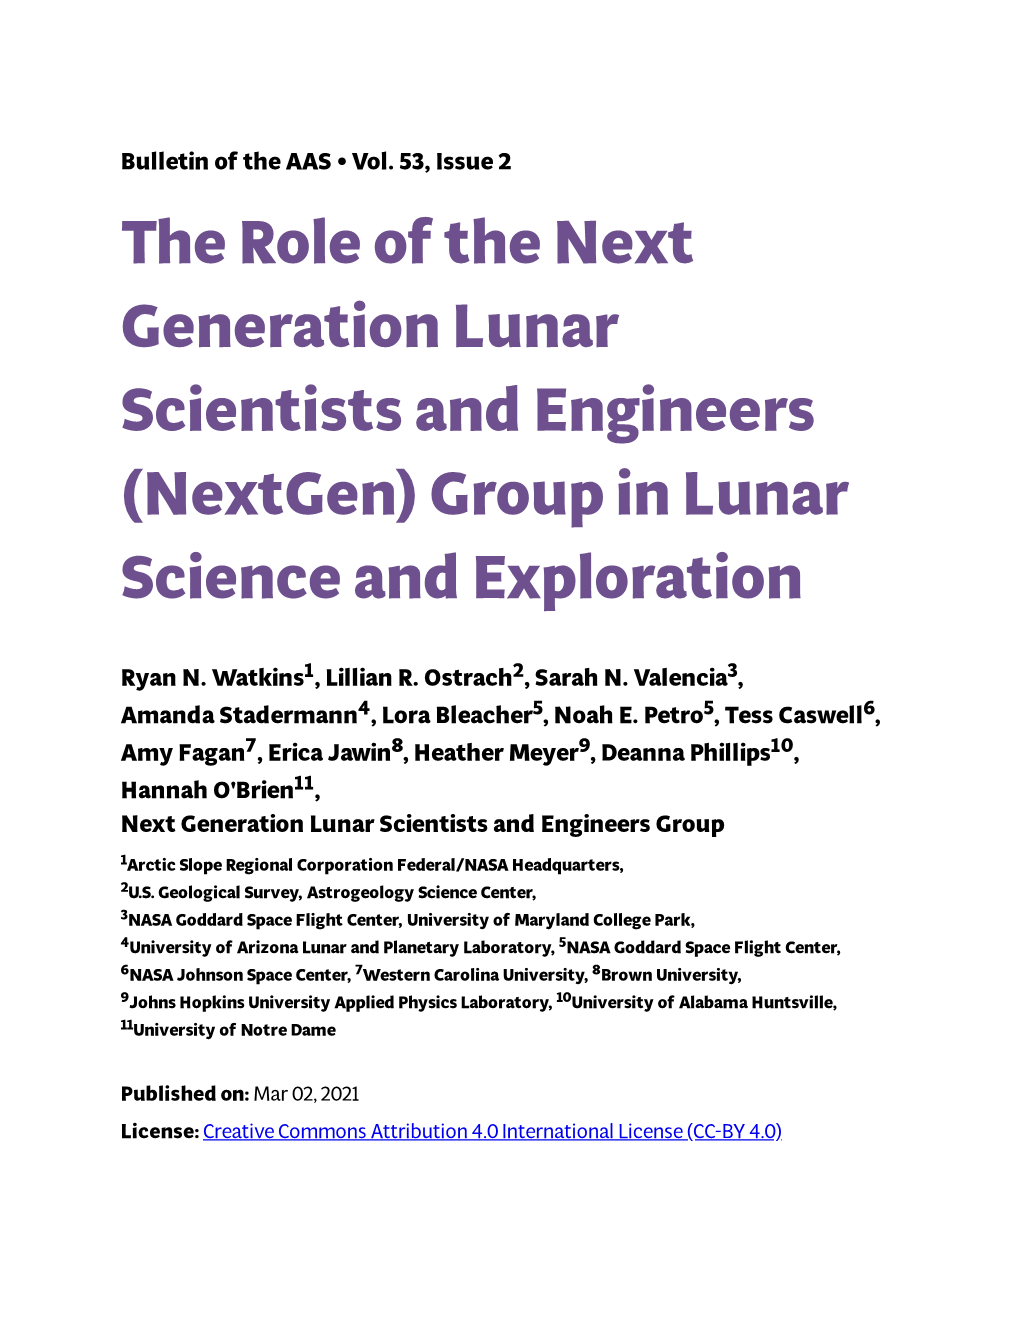 The Role of the Next Generation Lunar Scientists and Engineers (Nextgen) Group in Lunar Science and Exploration